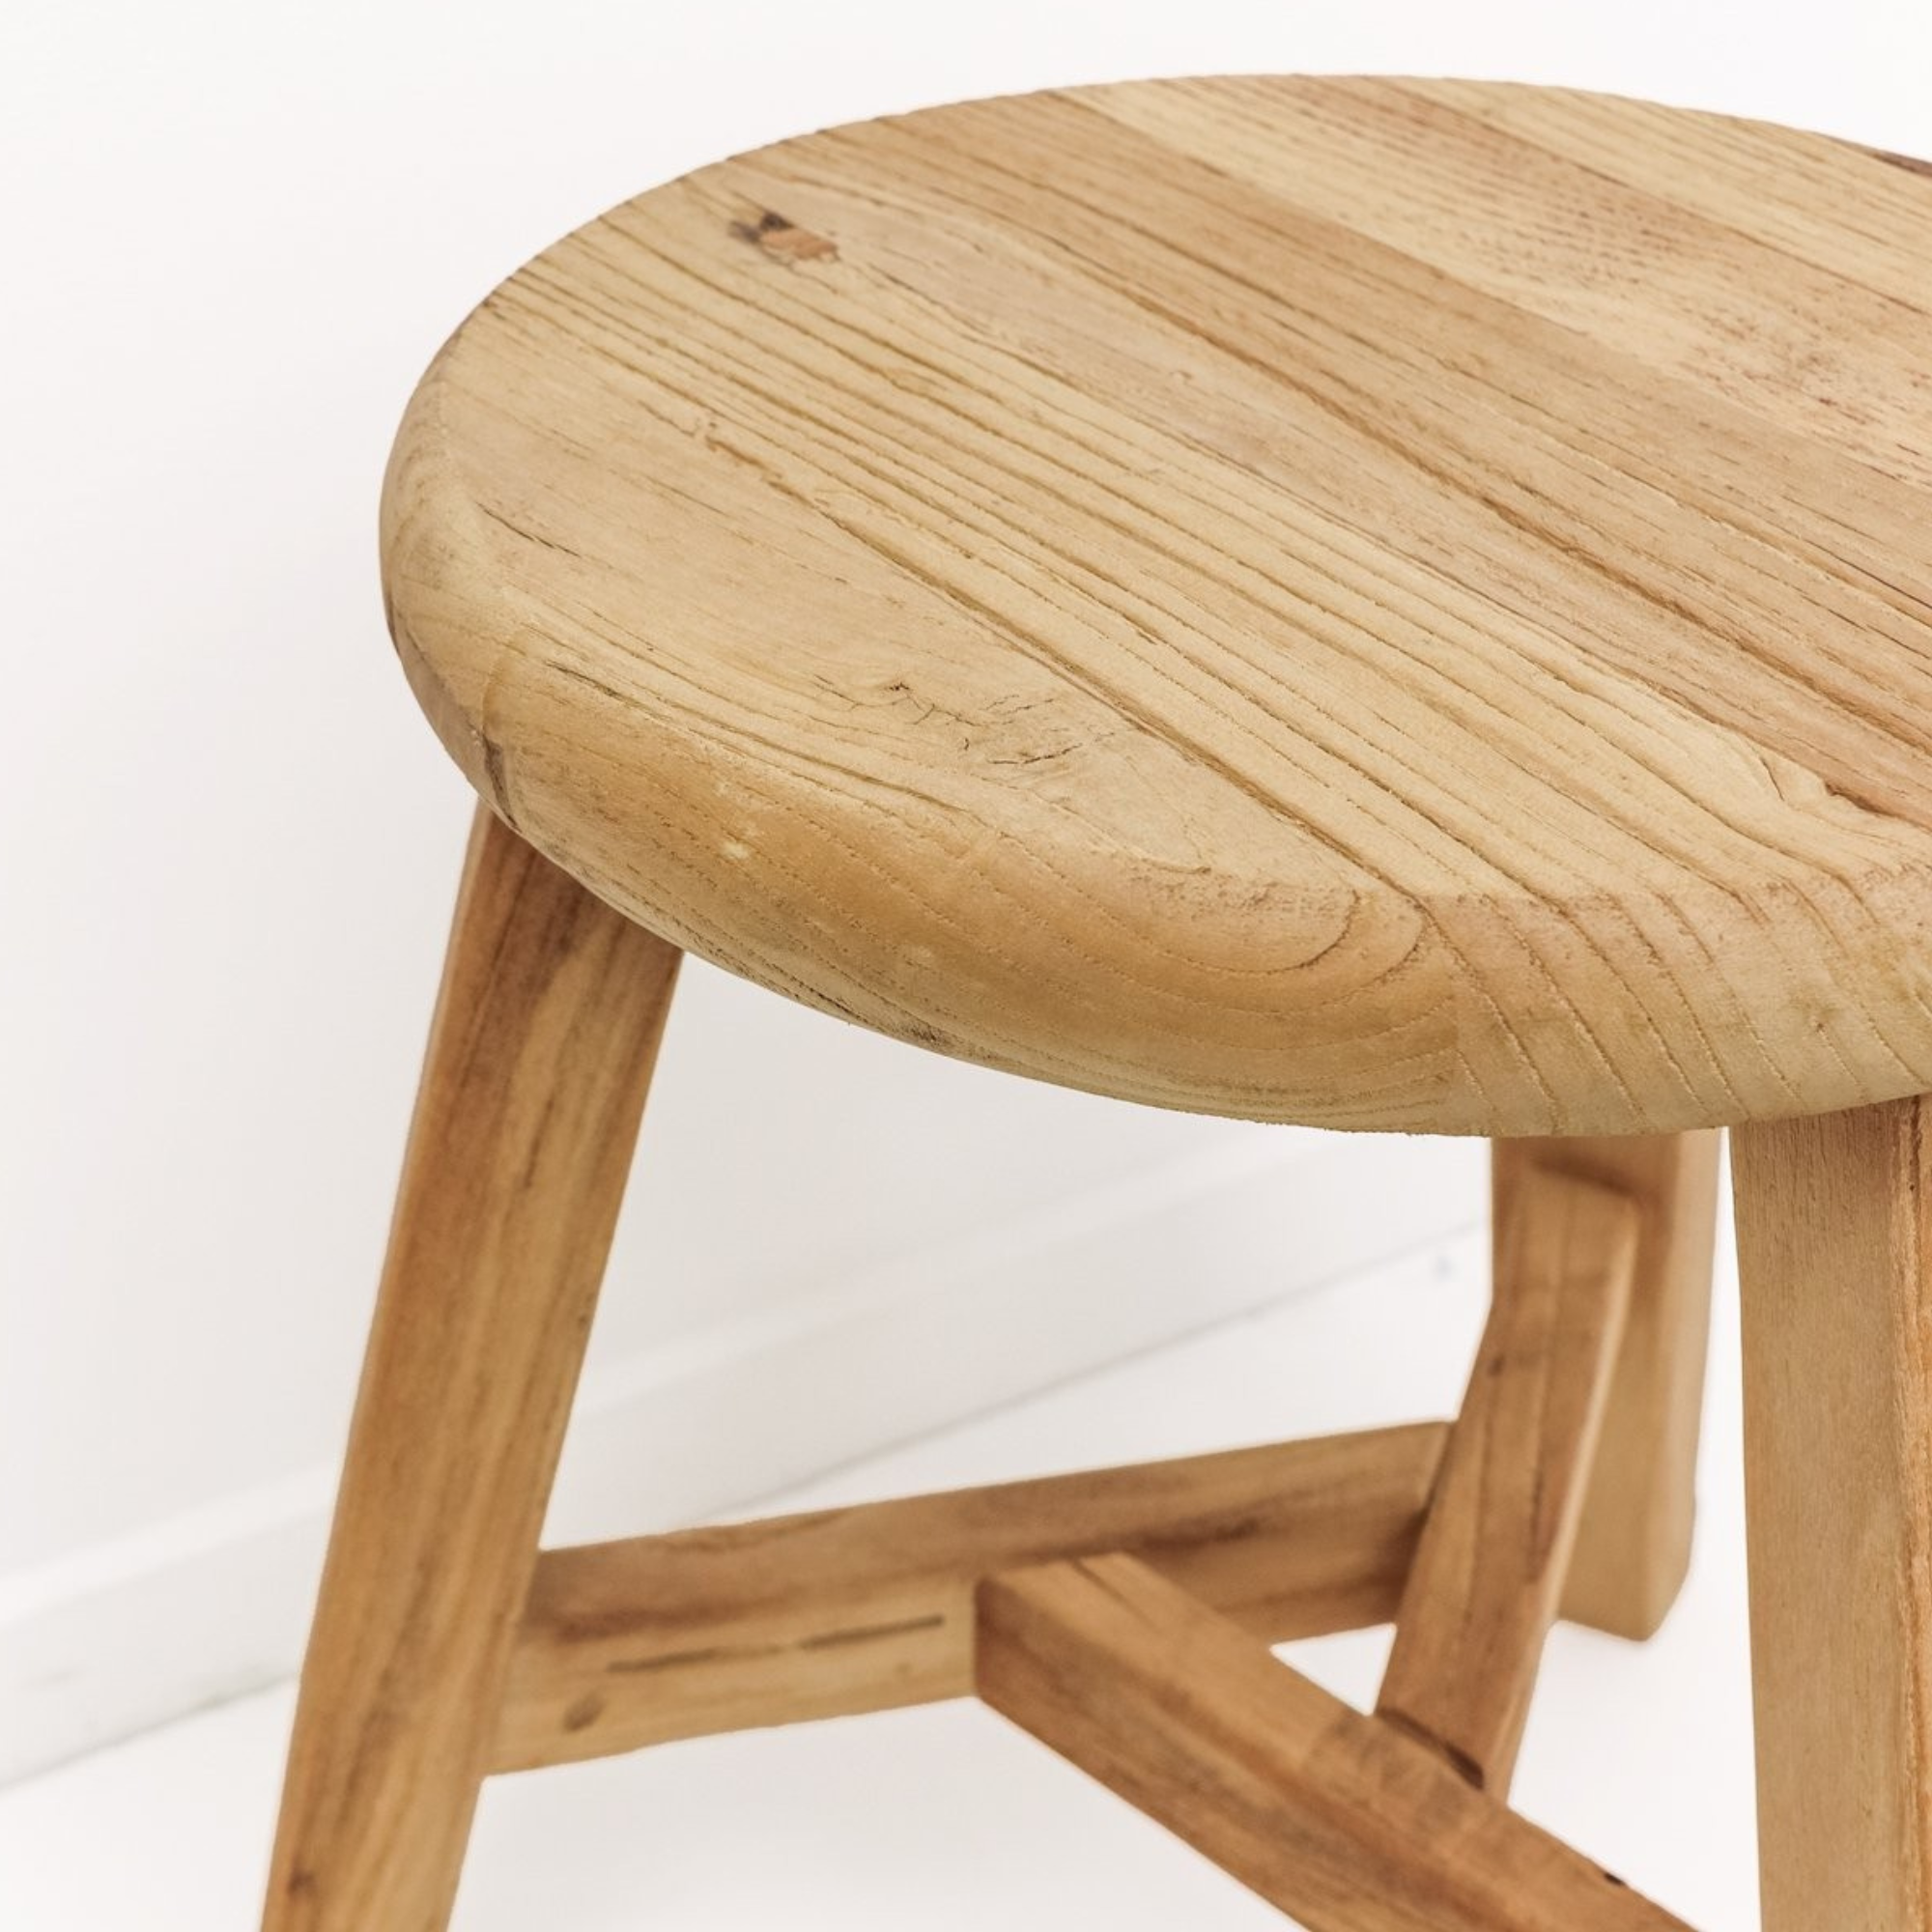 PARQ ROUND STOOL | NATURAL OR BLACK